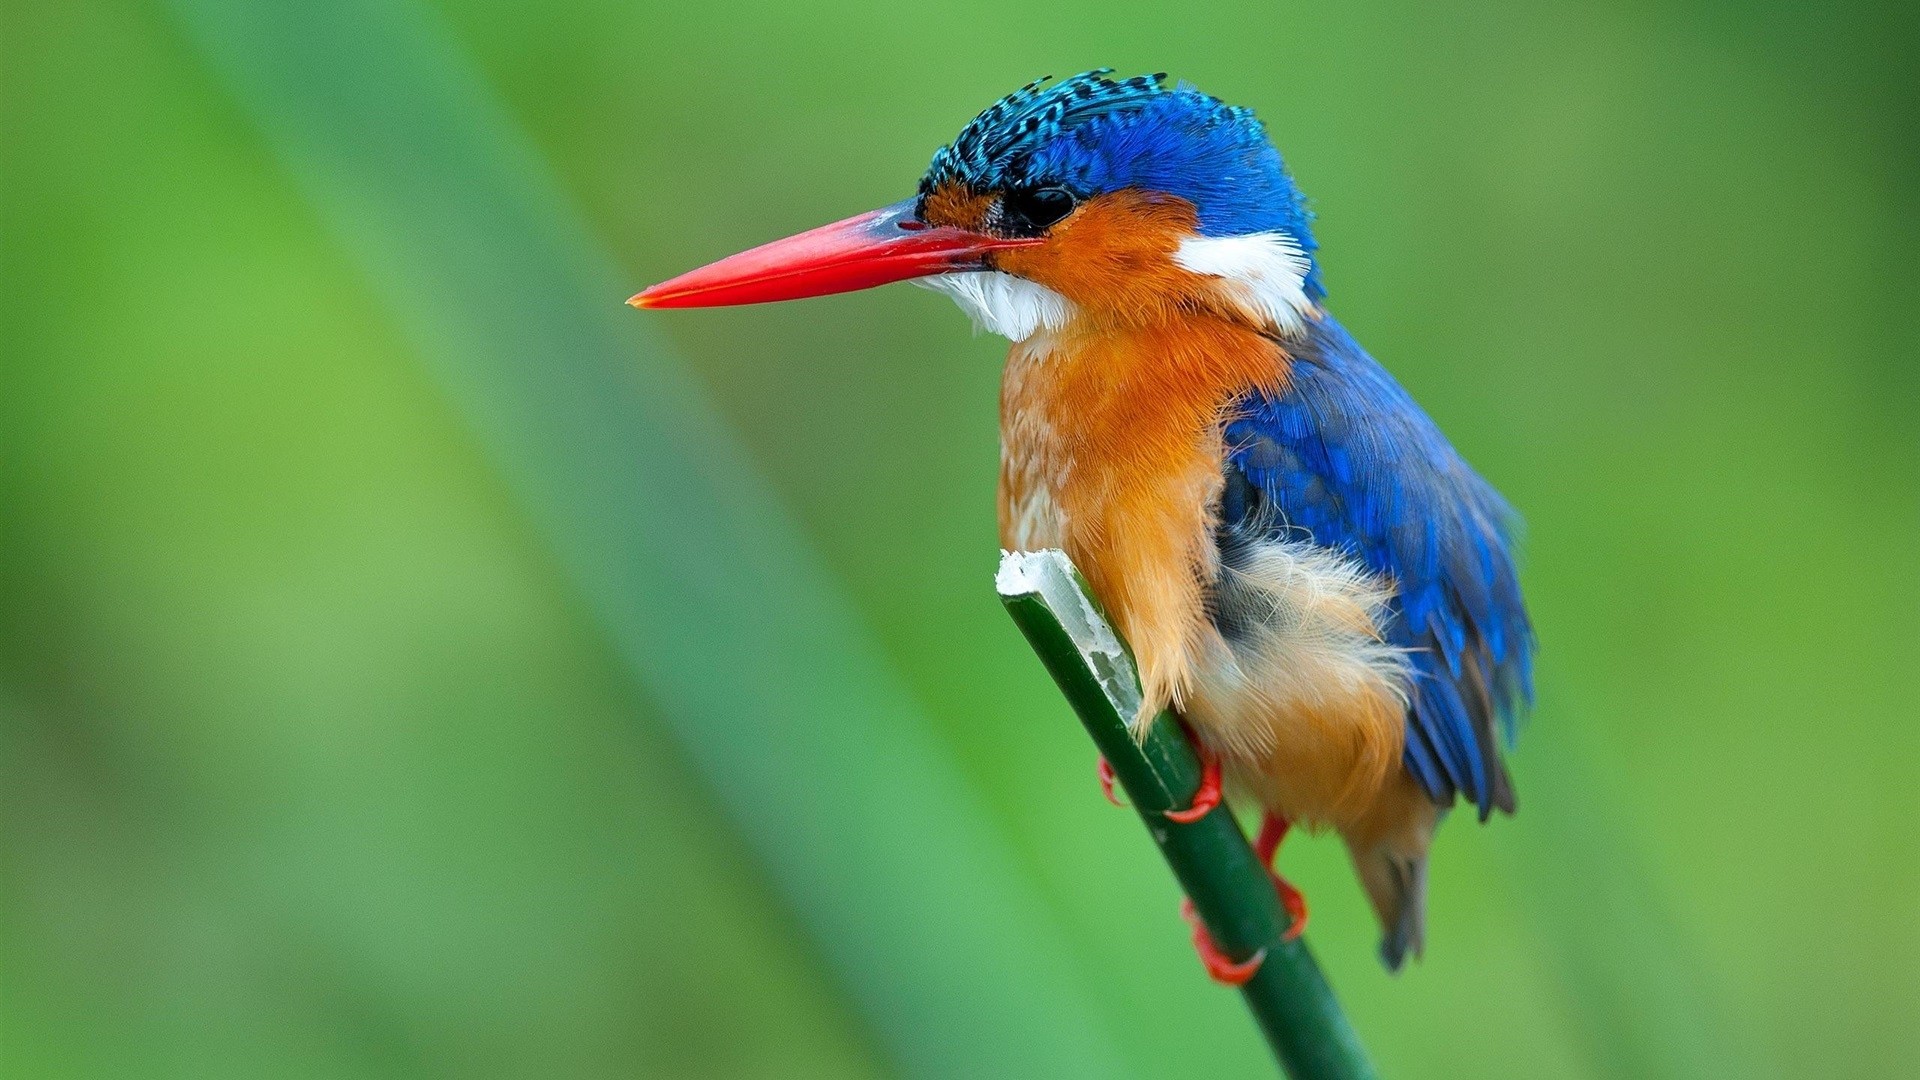 Kingfisher wallpaper for pc